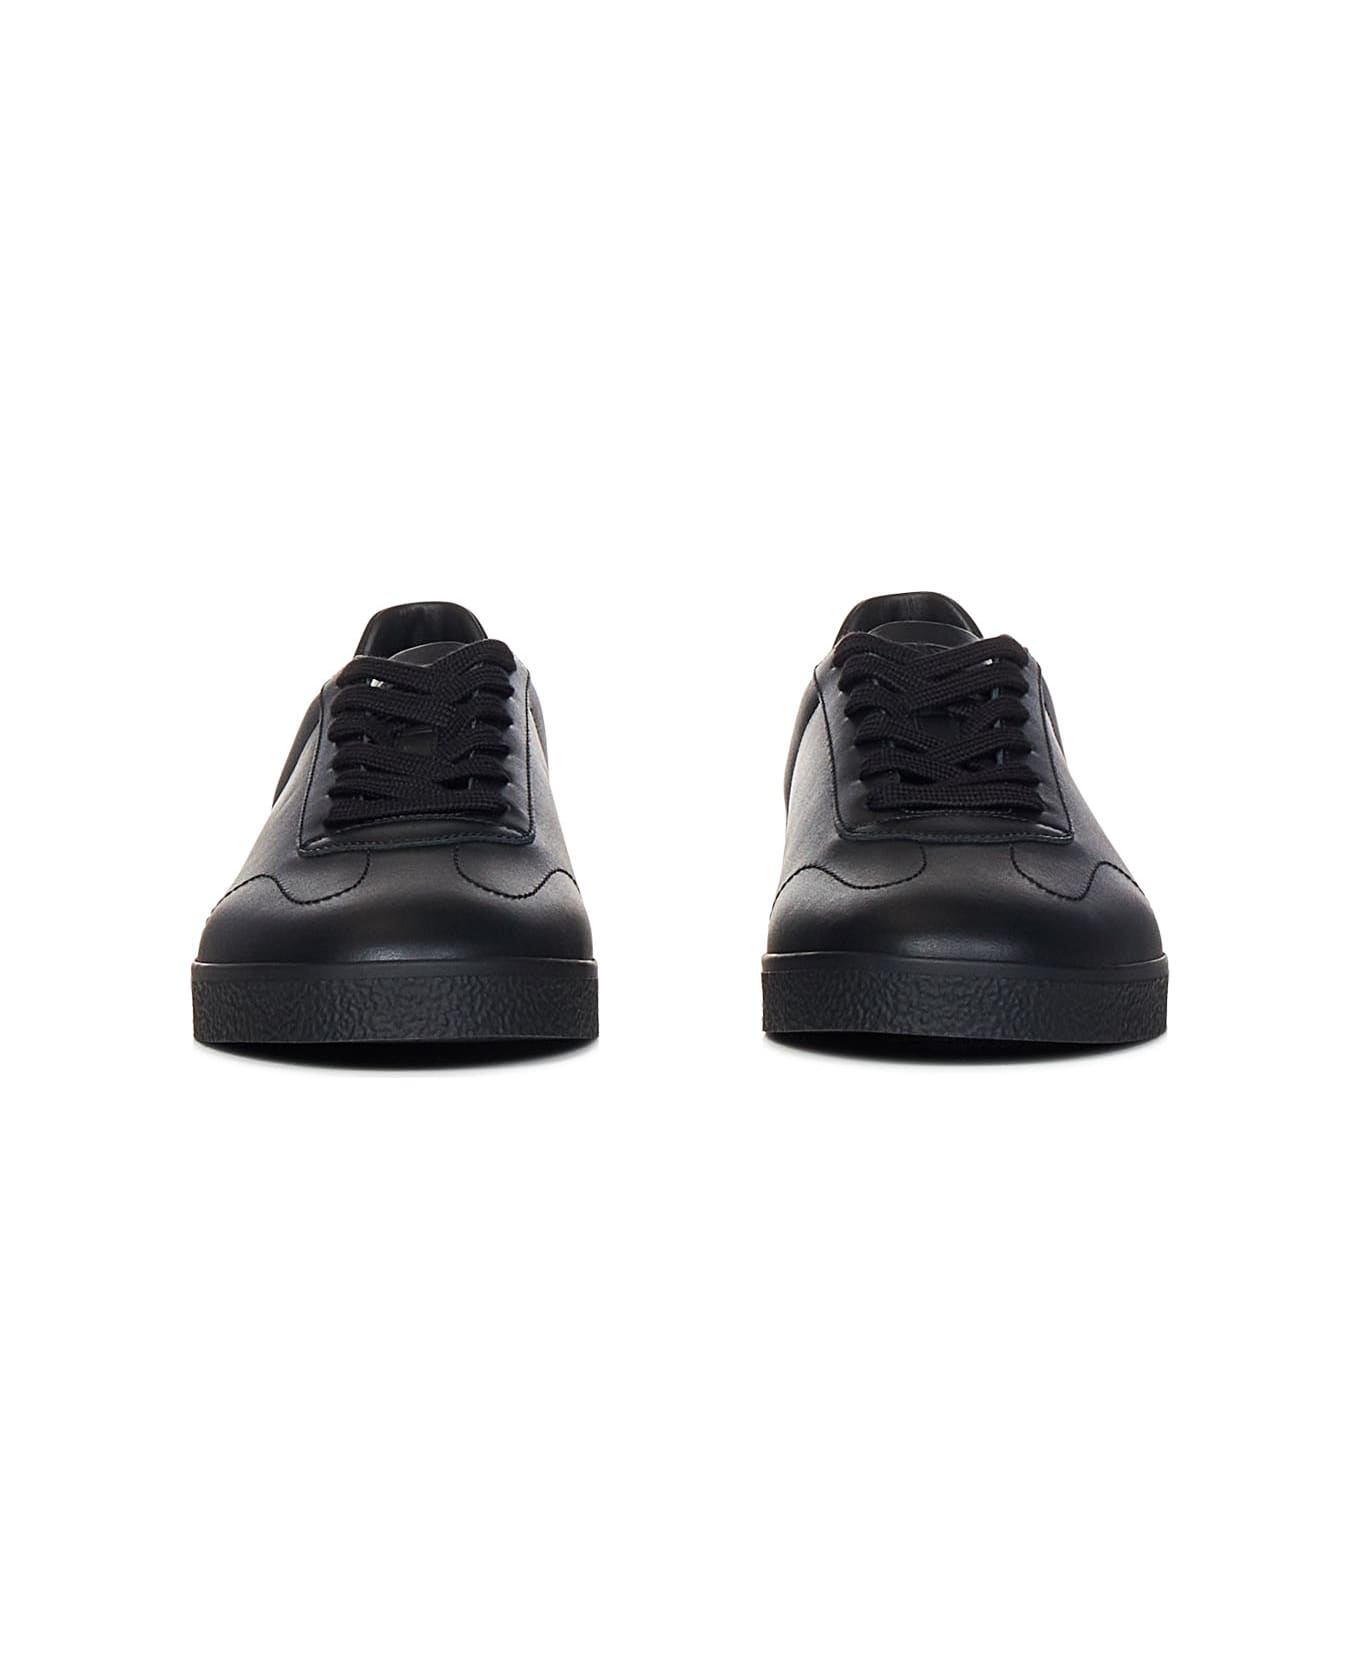 Givenchy Town Sneakers - Black スニーカー